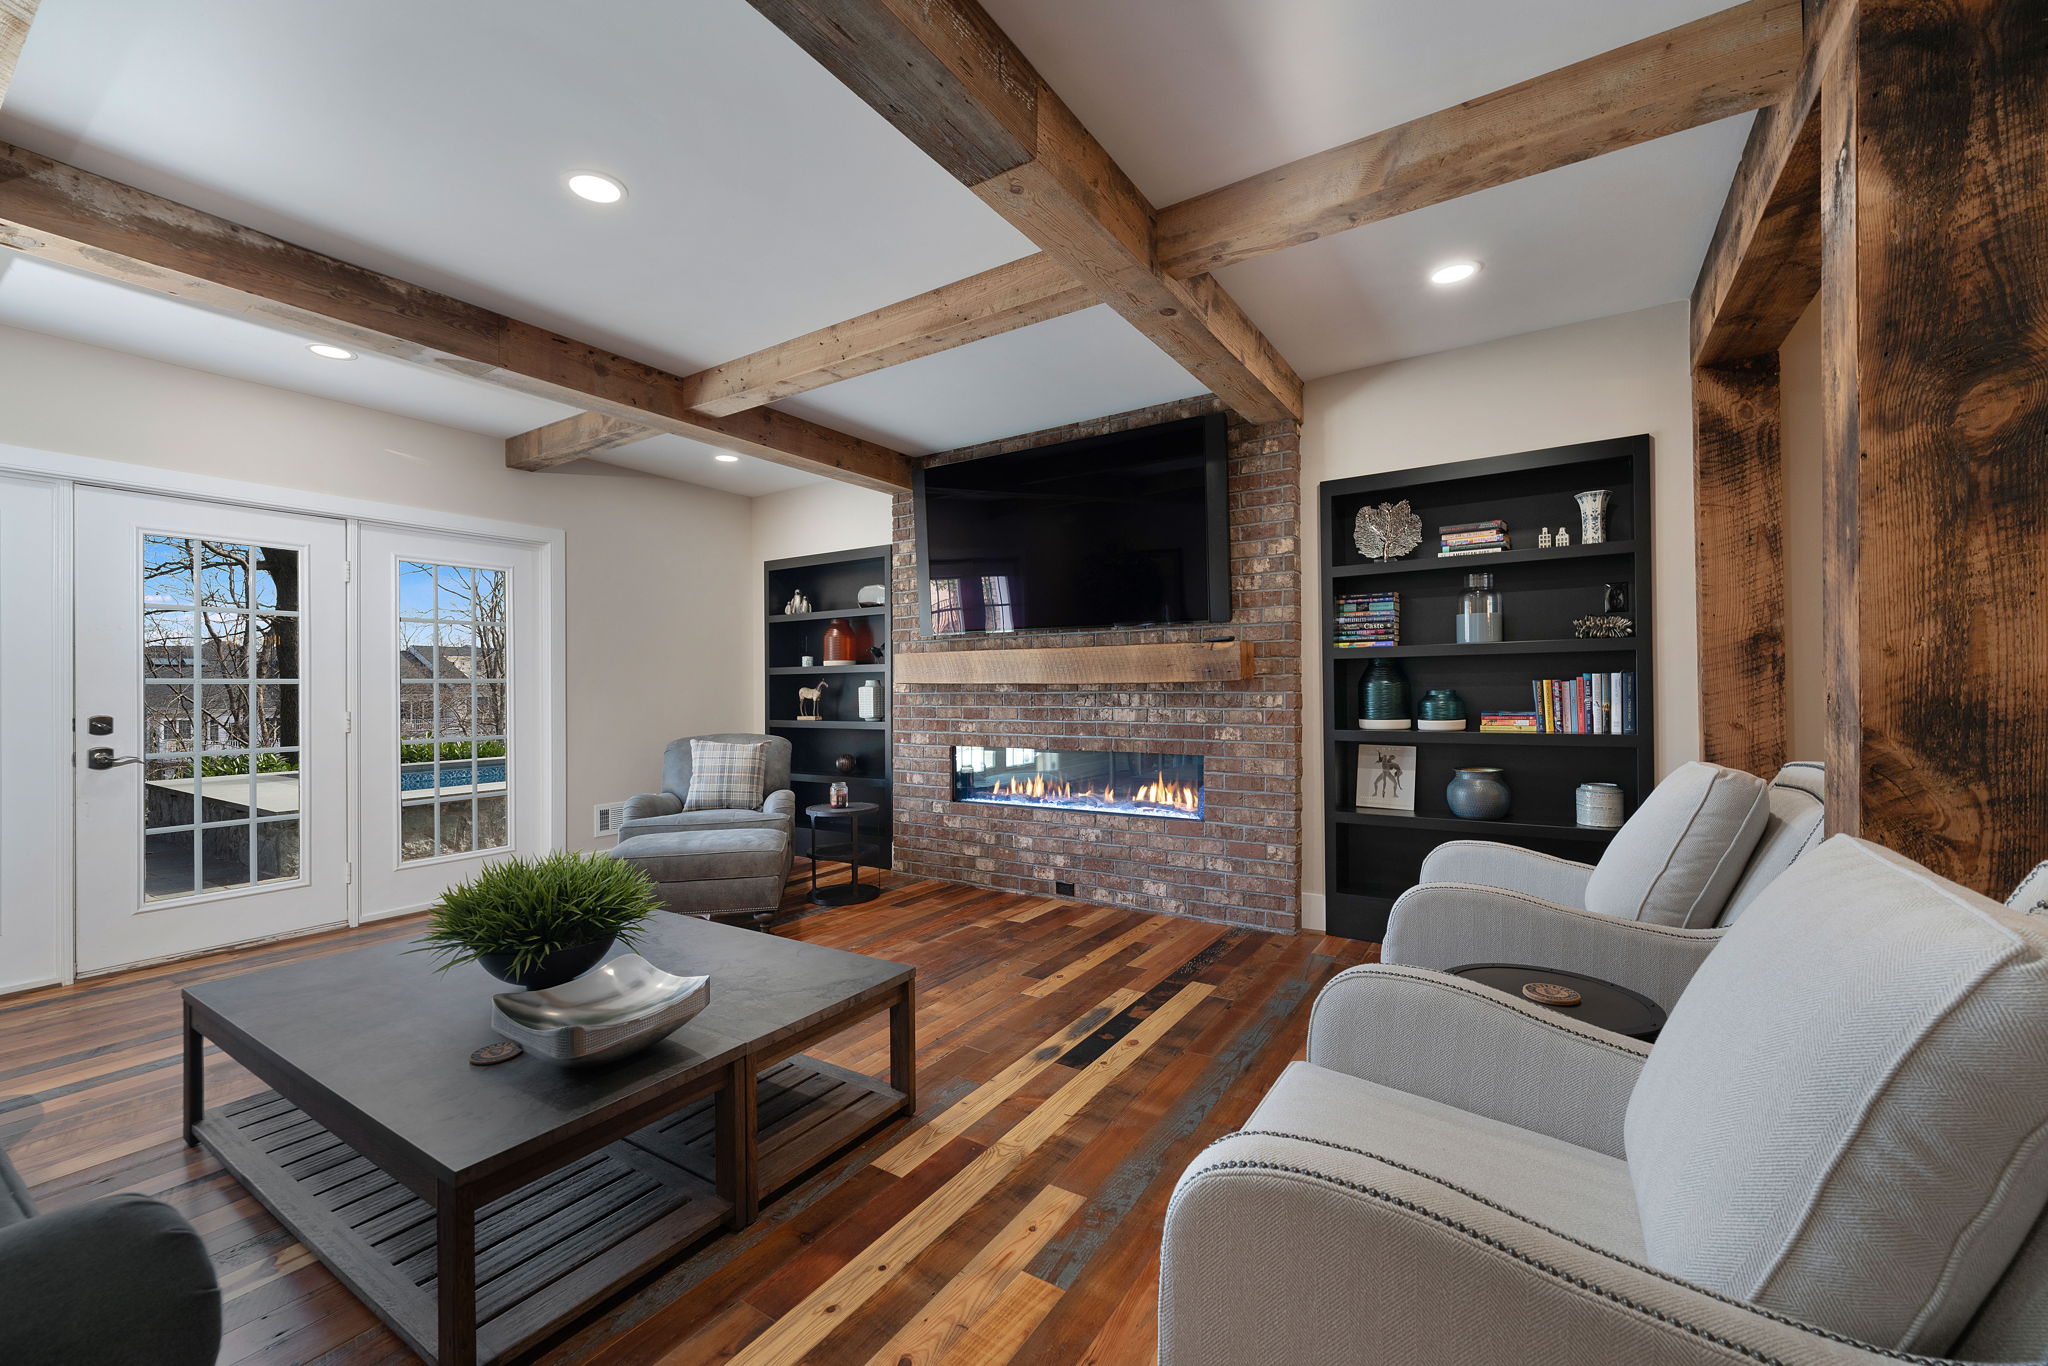 The lower level family room has a gas fireplace